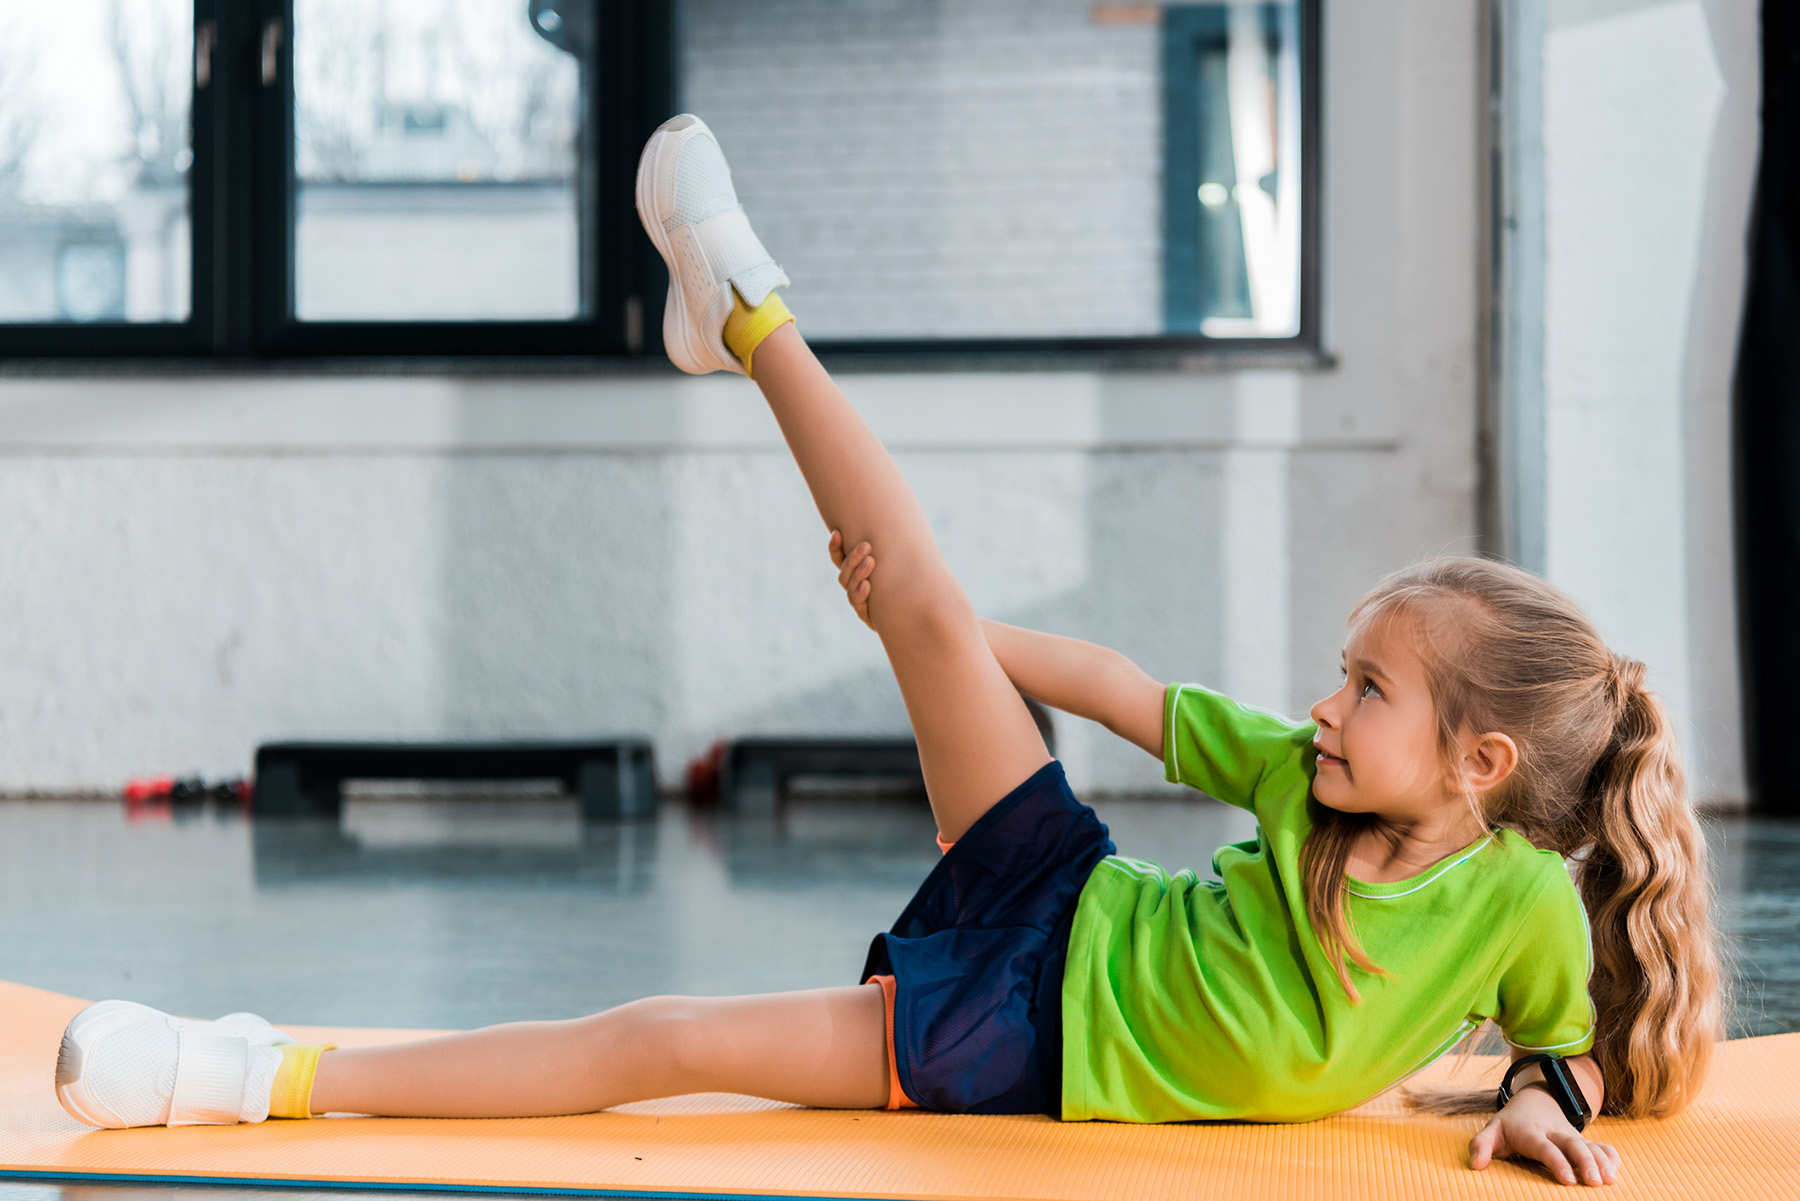 How Kids Can Learn to Stretch before Every Dance Class